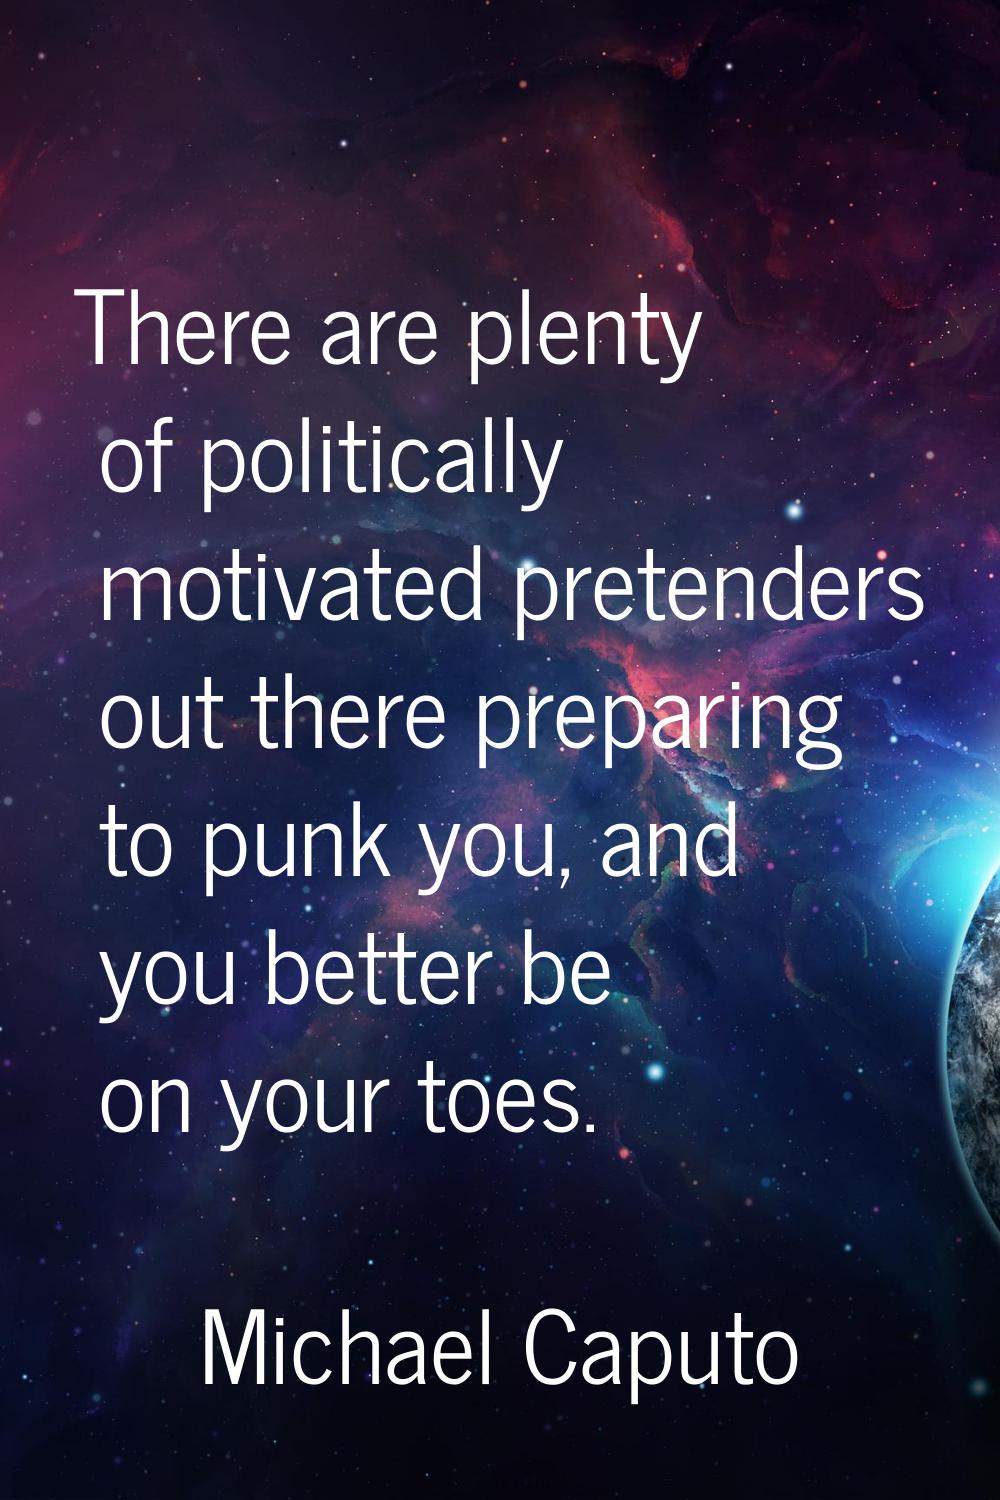 There are plenty of politically motivated pretenders out there preparing to punk you, and you bette